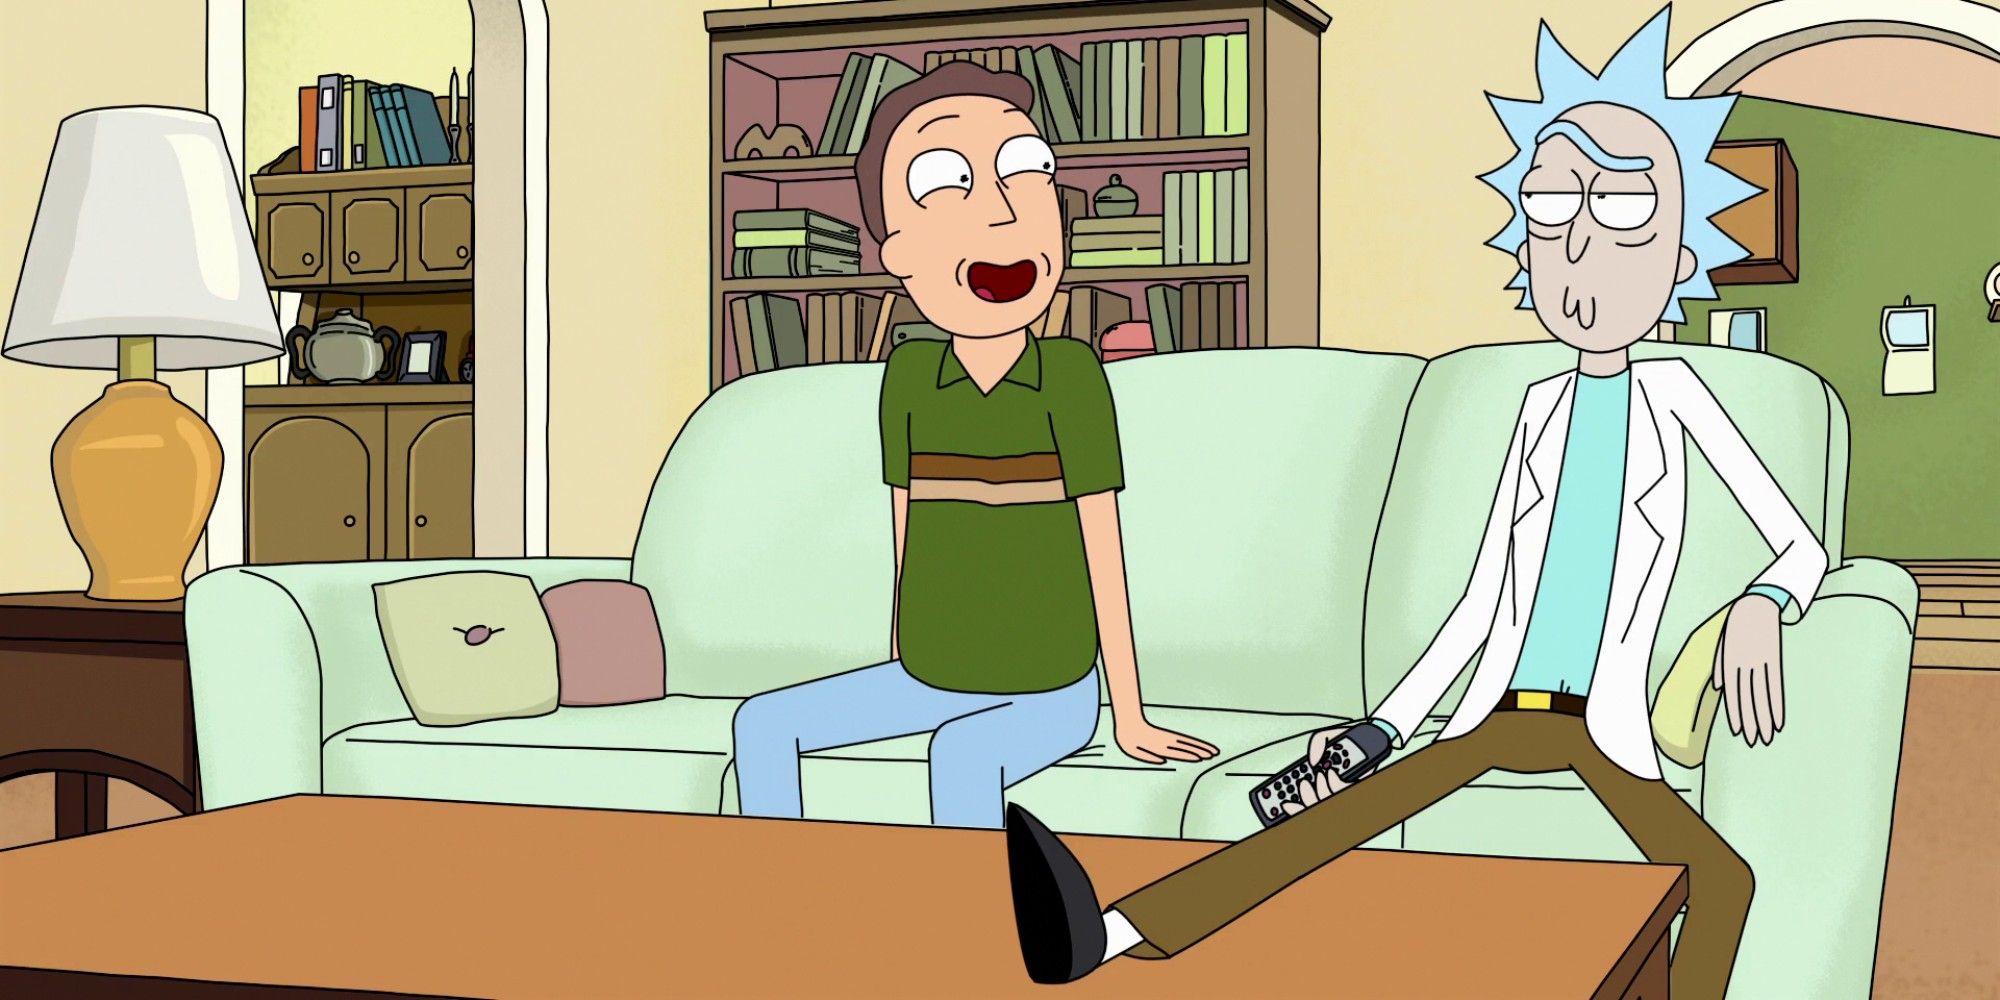 jerry and rick in rick and morty